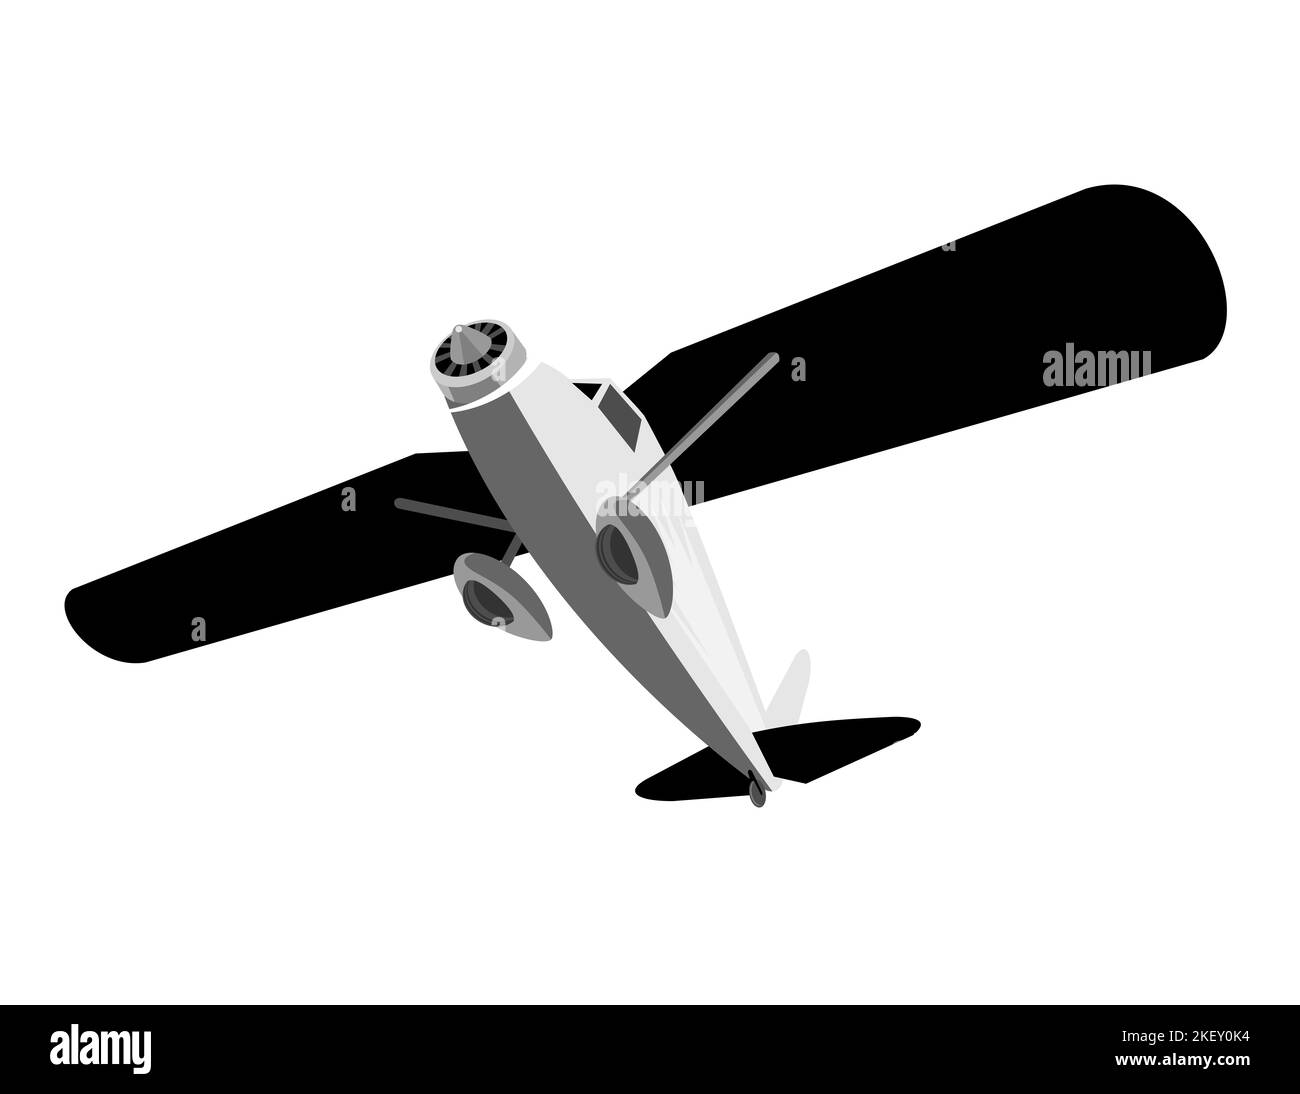 Illustration of a propeller airplane airliner on full flight flying overhead on isolated background done in retro style. Stock Photo